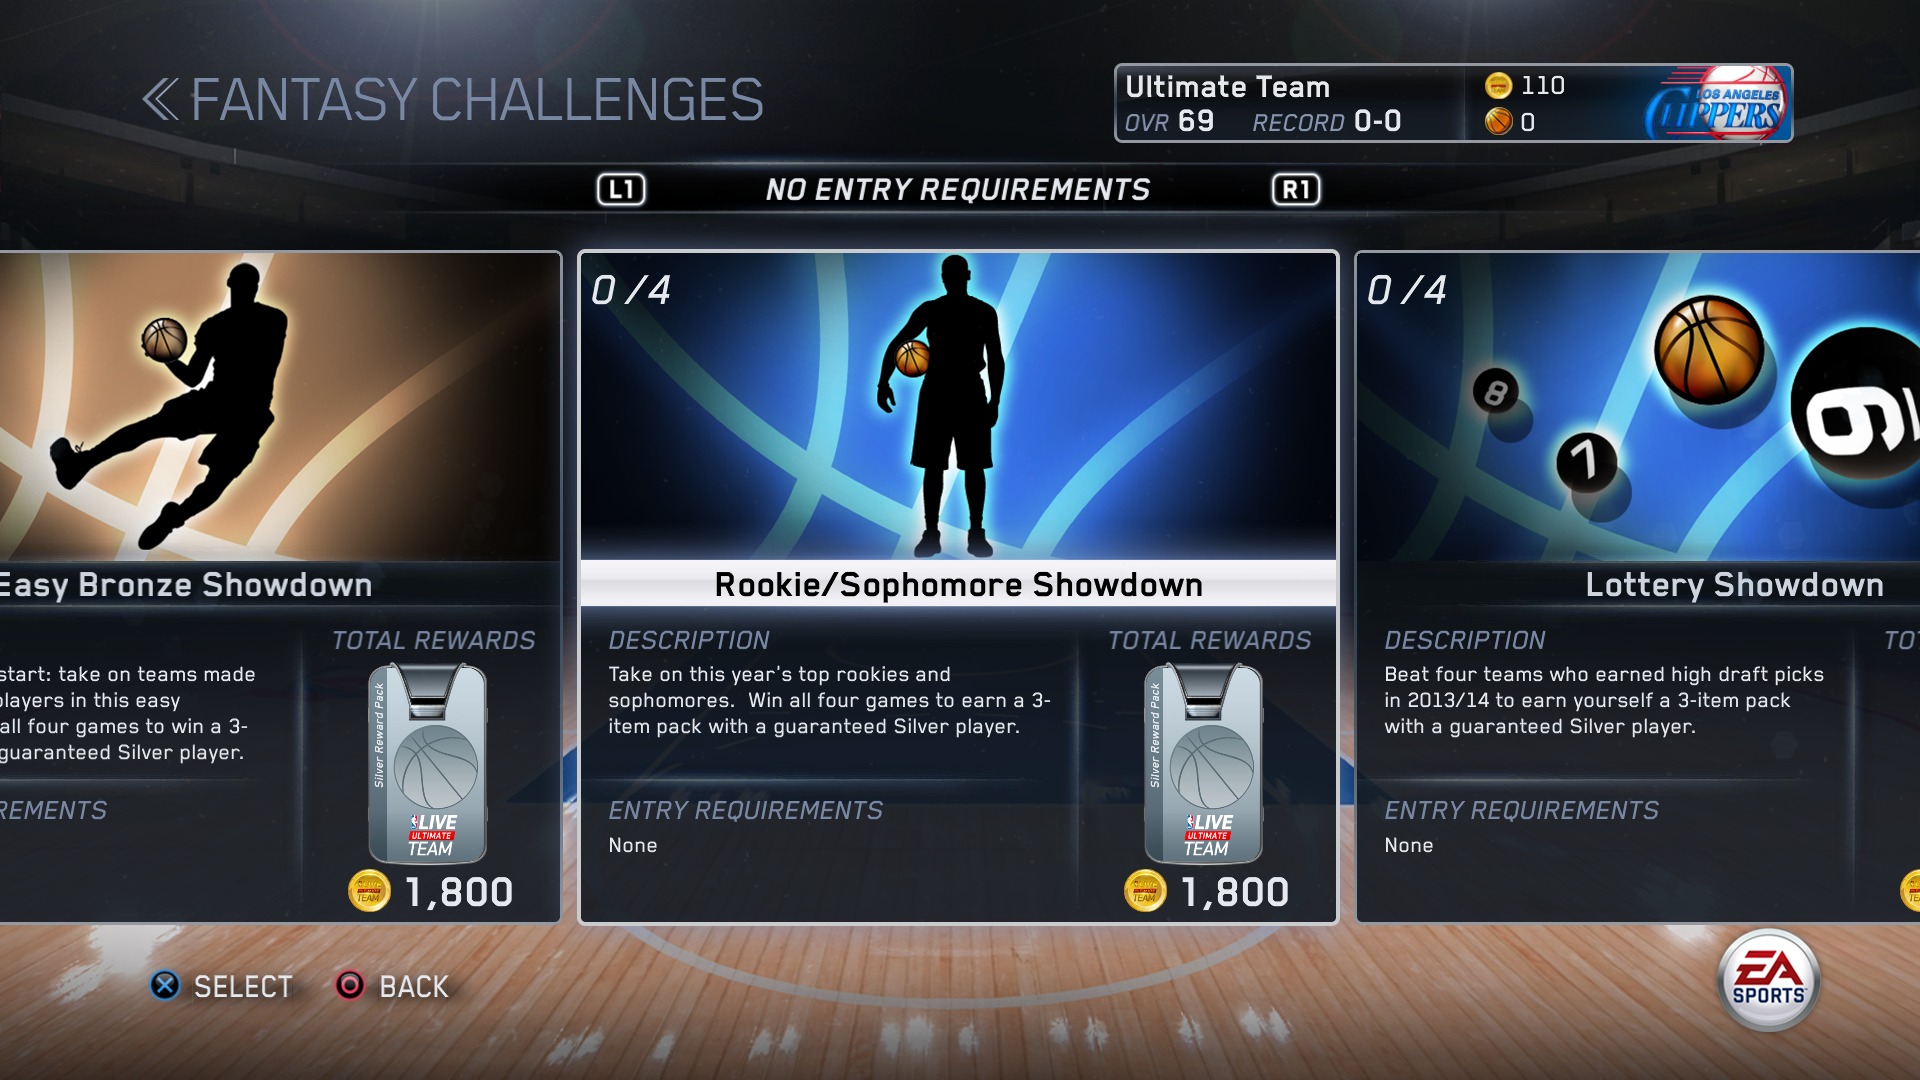 NBA LIVE 15 Ultimate Team Challenges